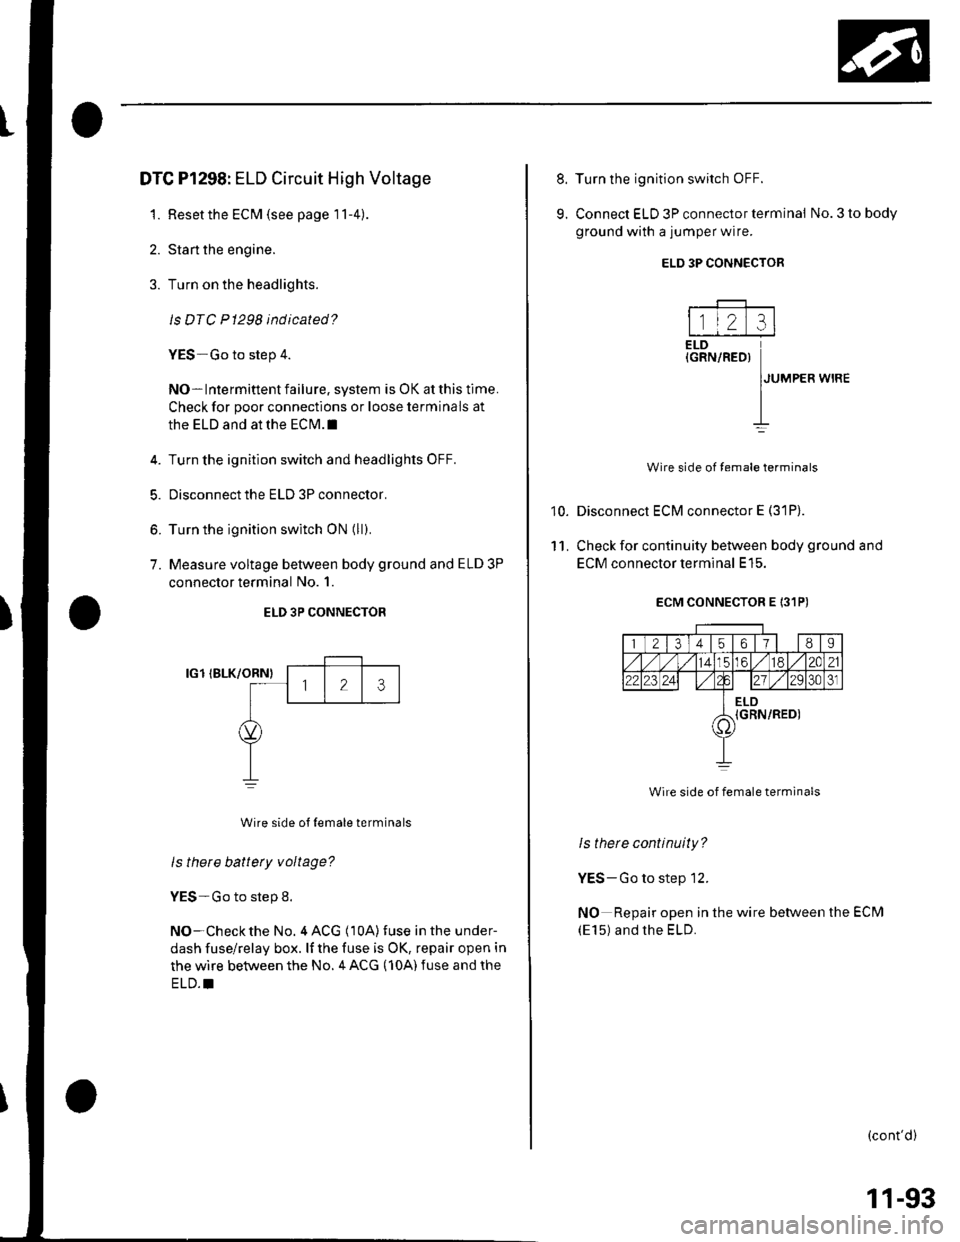 HONDA CIVIC 2003 7.G Owners Guide DTC Pl298: ELD Circuit High Voltage
1. Resetthe ECM (see page 11-4)
2. Stan the engine.
3. Turn on the headlights.
ls DTC P1298 indicated?
YES-Go to step 4.
NO- Intermittent failure. system is OK at t